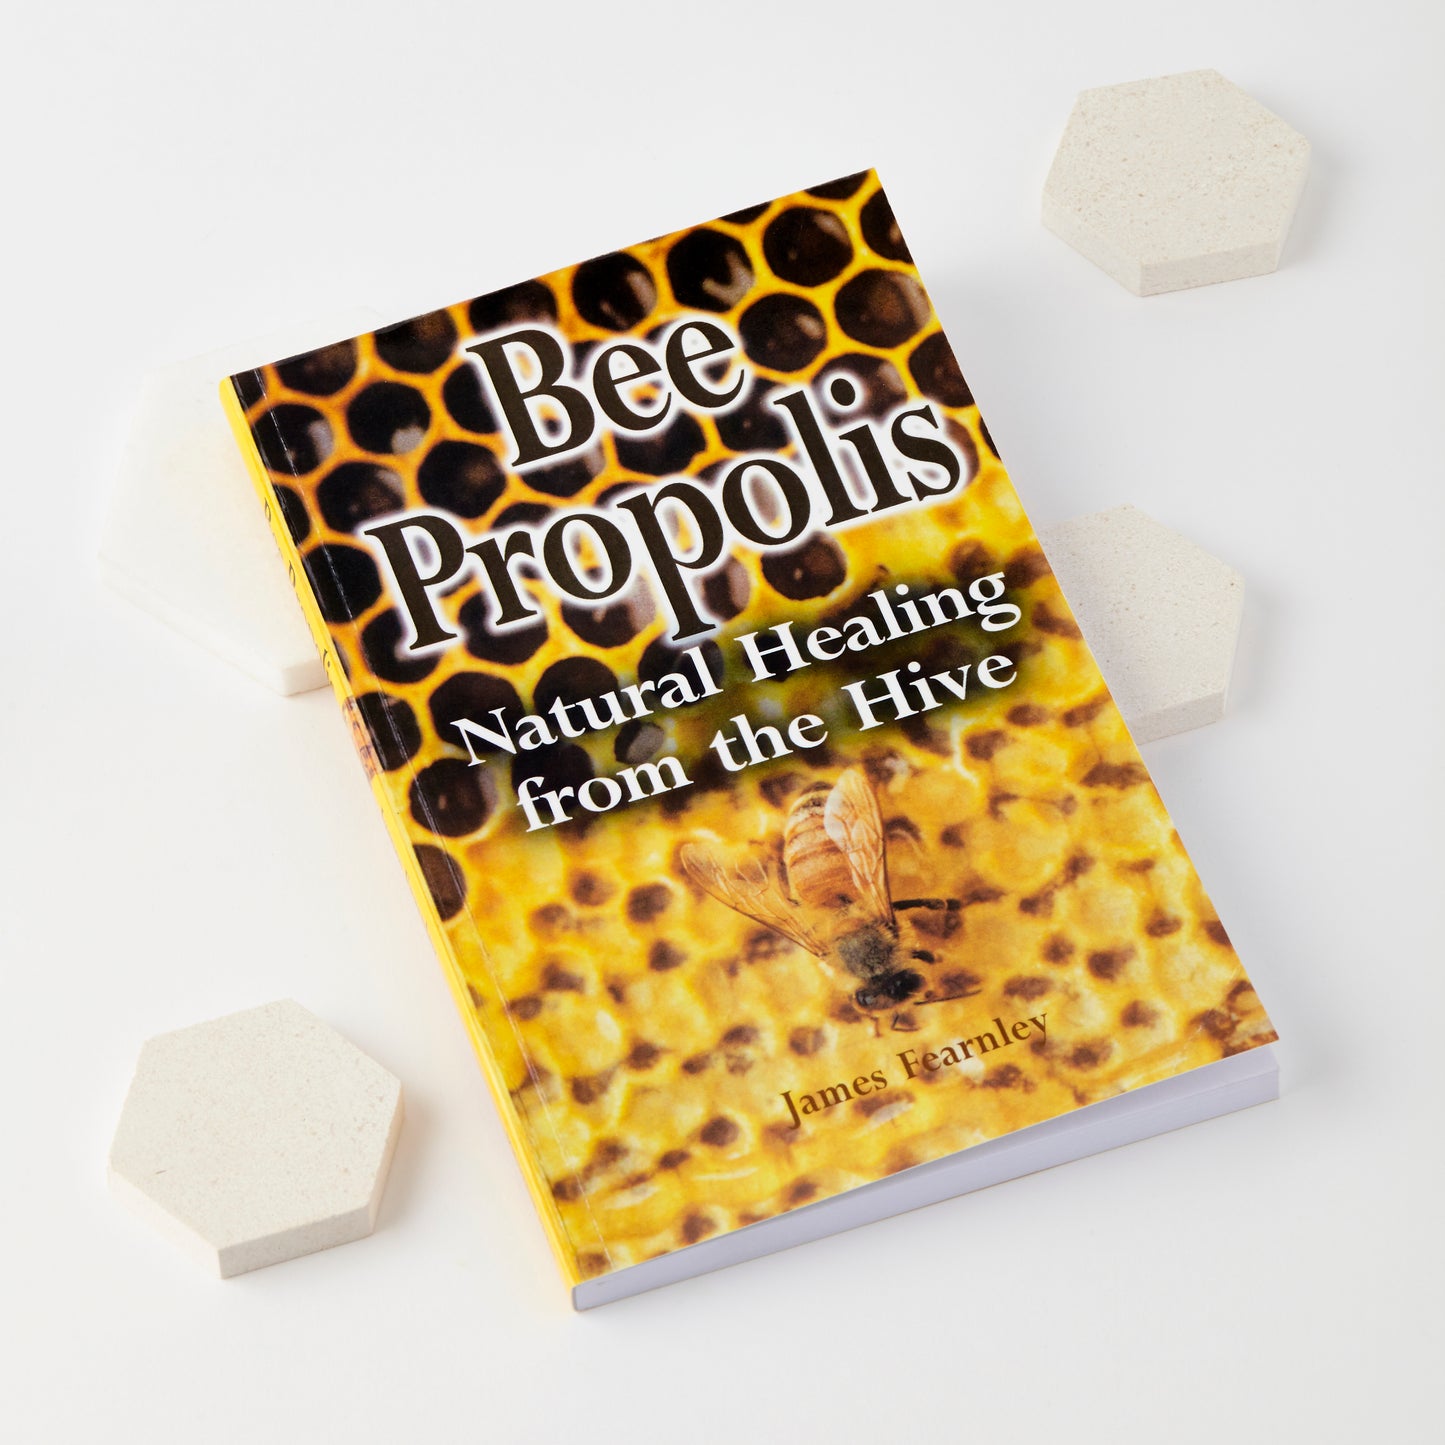 Bee Propolis - Natural Healing from the Hive